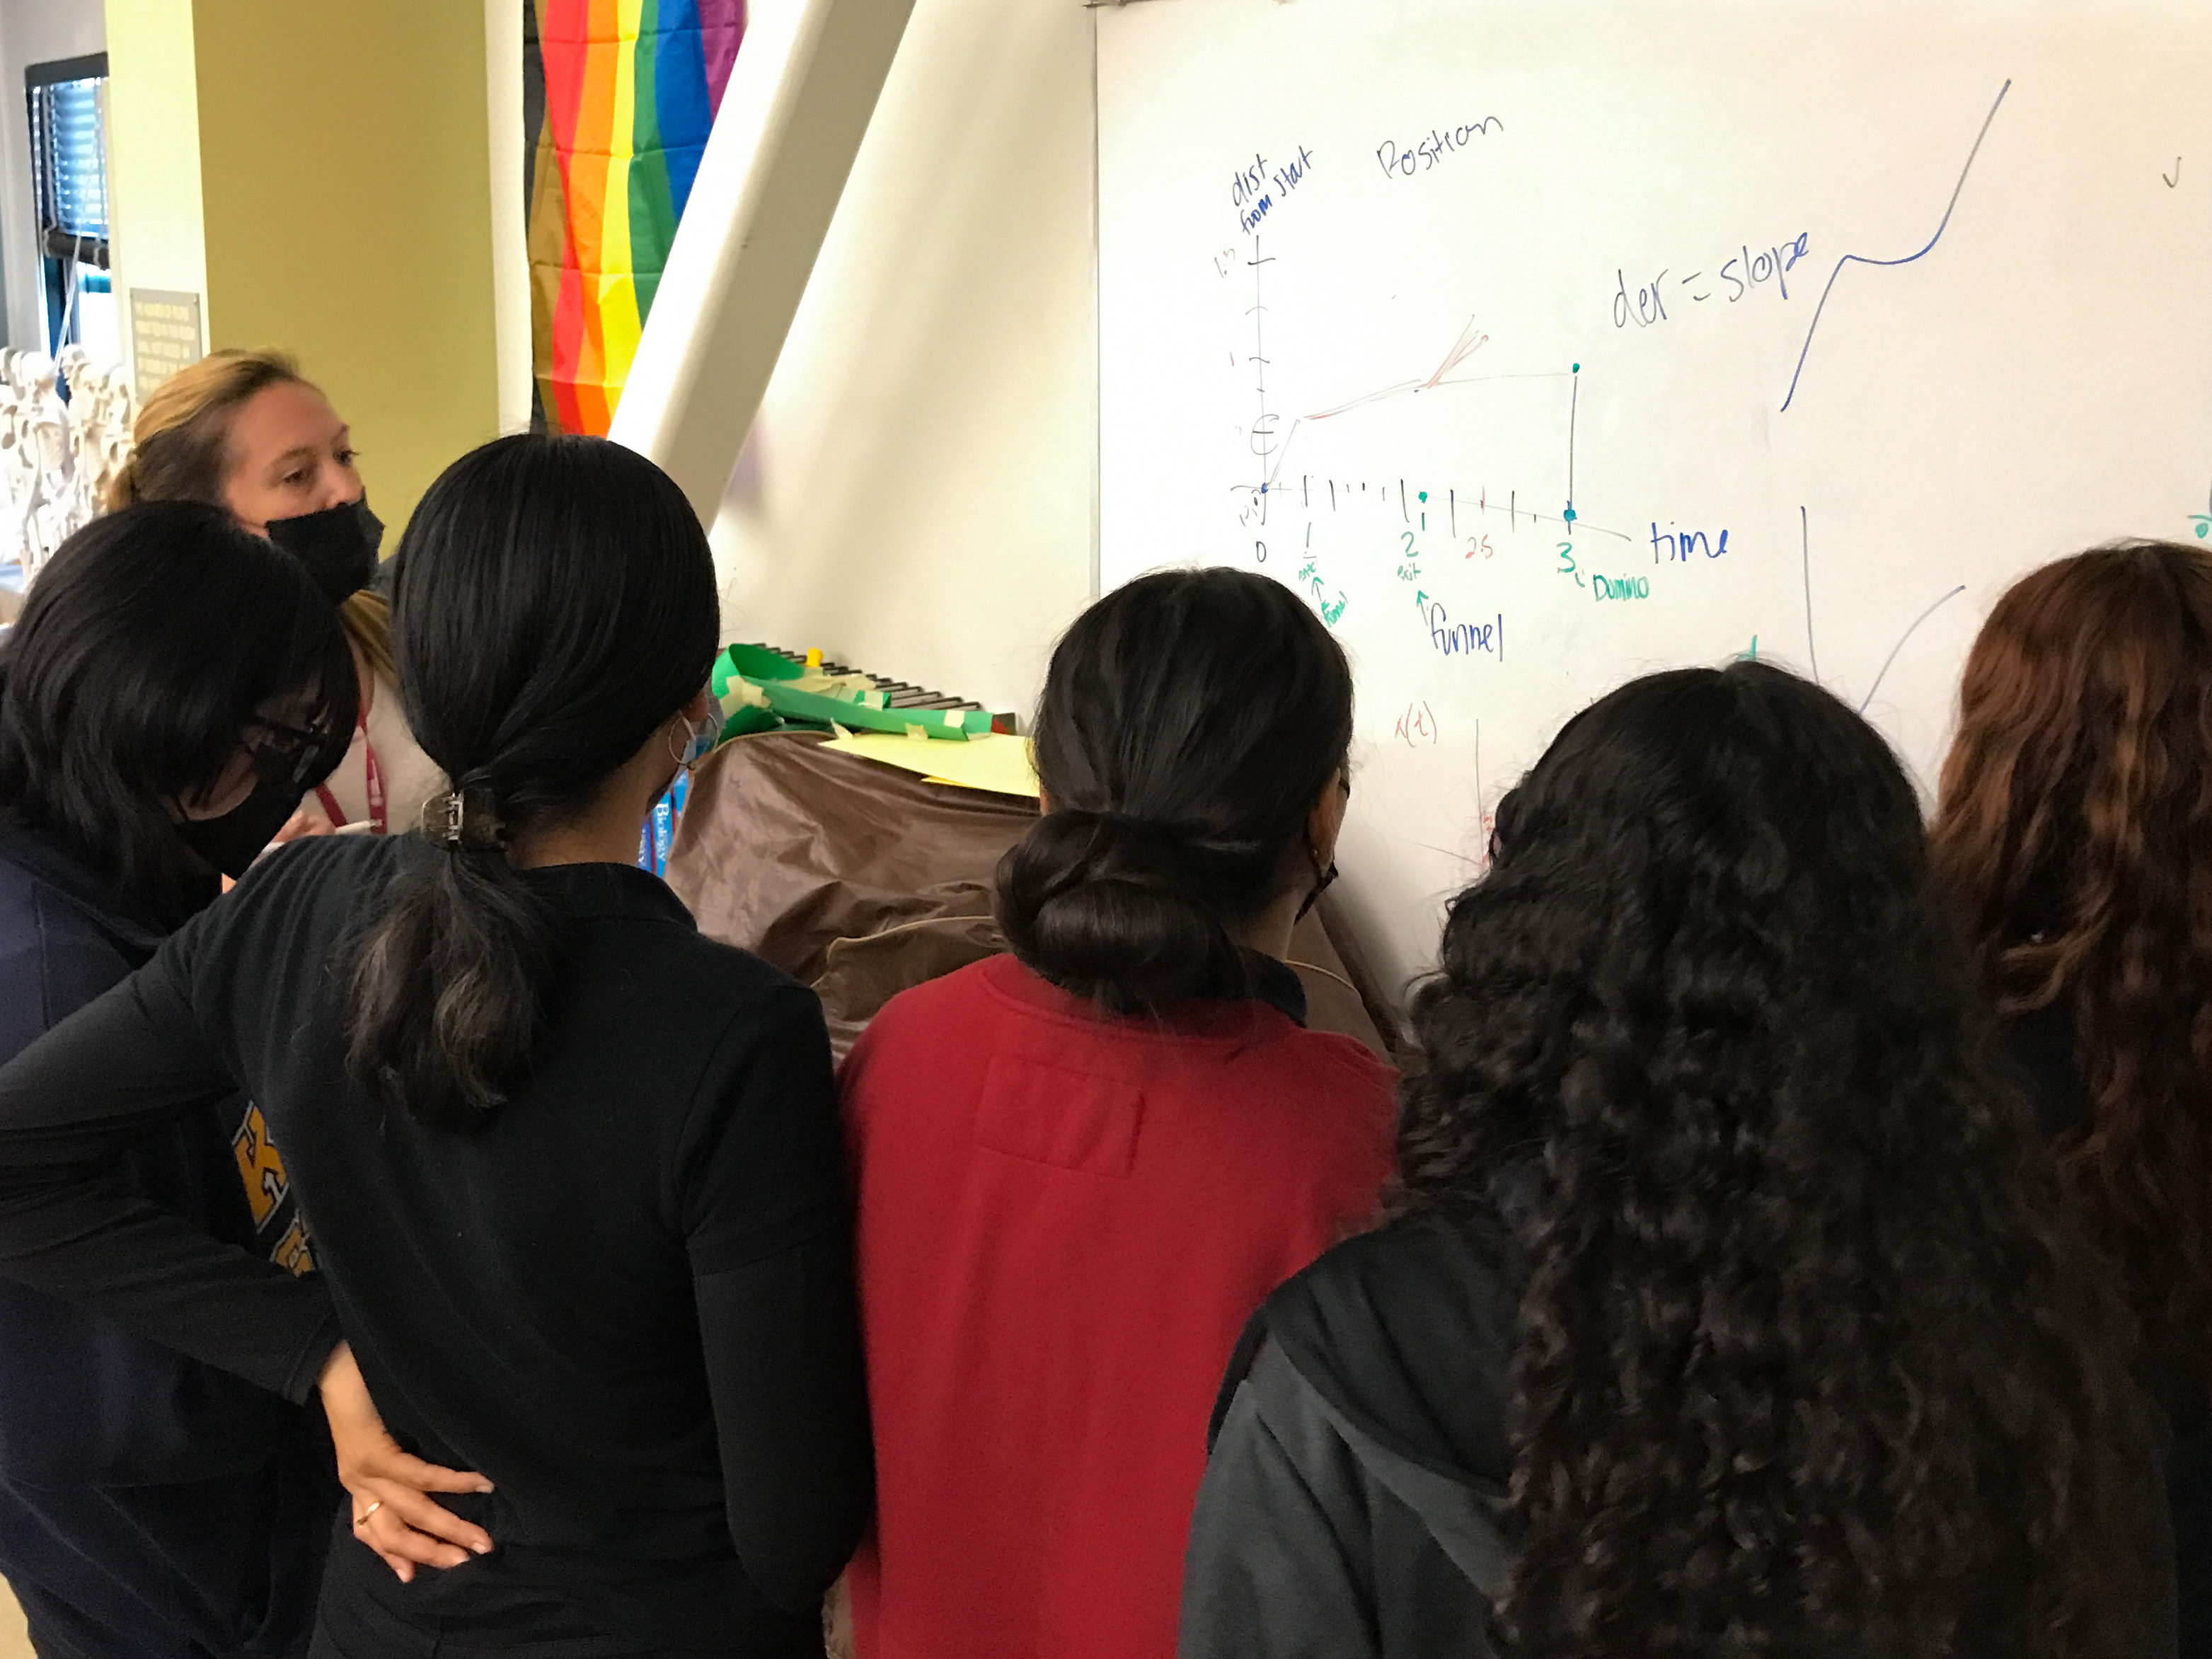 A group of five students with long dark hair stand next to each other and Ms. Risbrough looking at a whiteboard with graphs drawn on it.